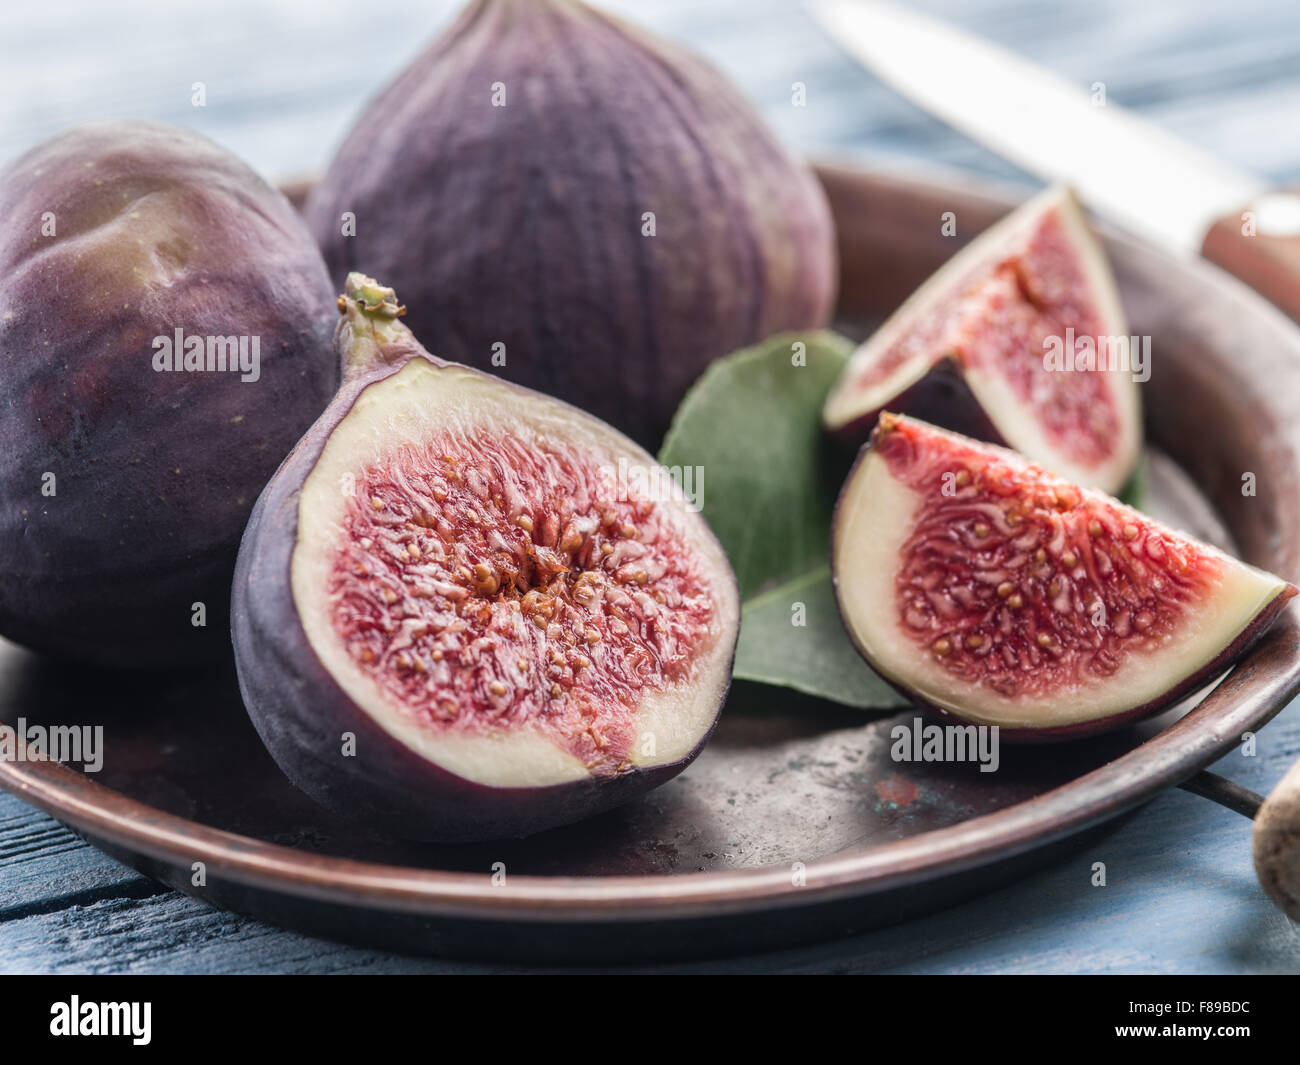 Ripe fig fruits on in the old tray on the wooden table. Stock Photo